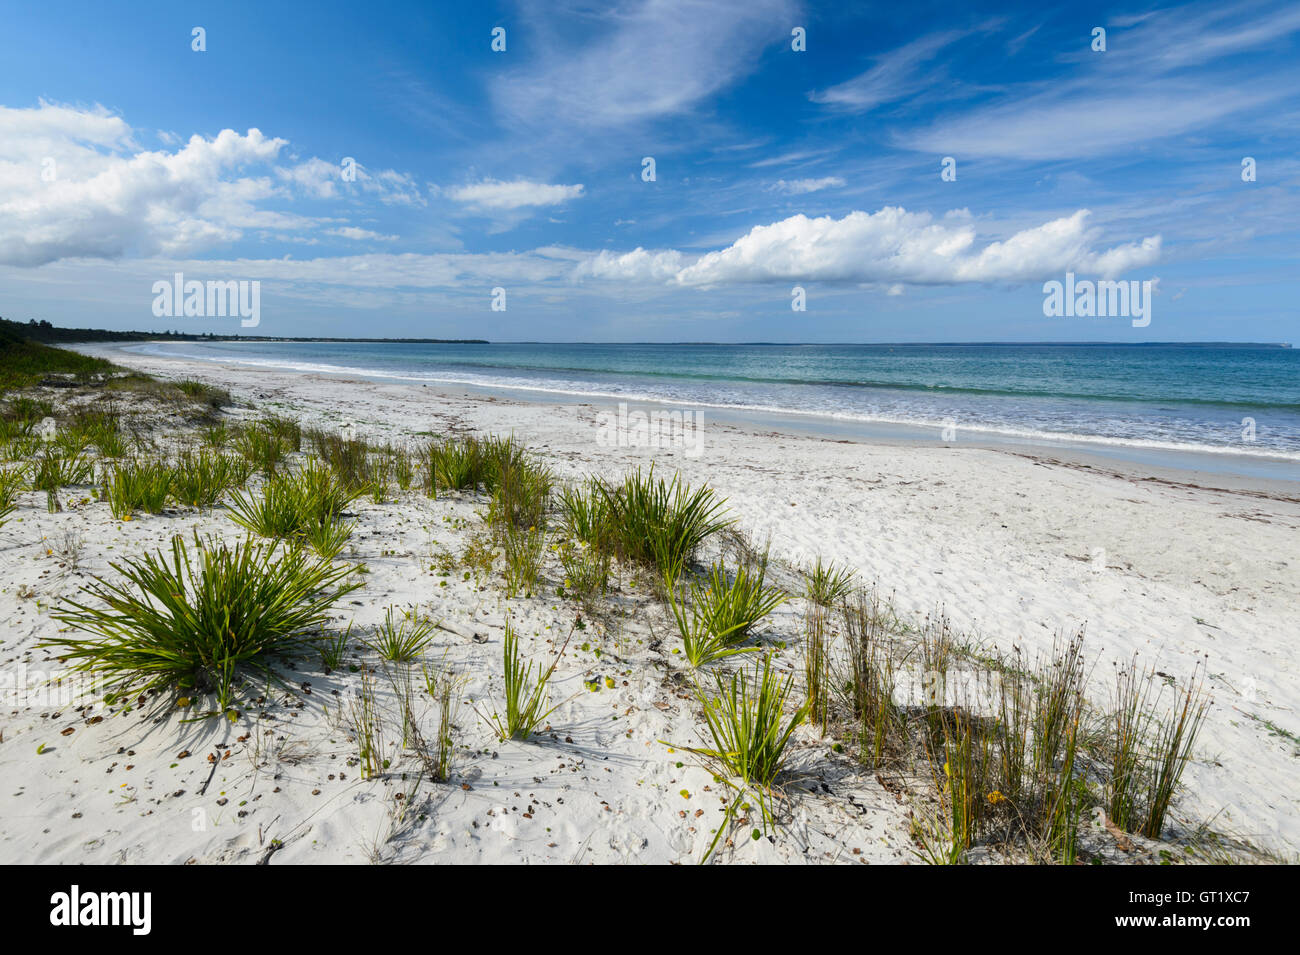 View of Myola Beach in picturesque Jervis Bay, New South Wales, NSW, Australia Stock Photo